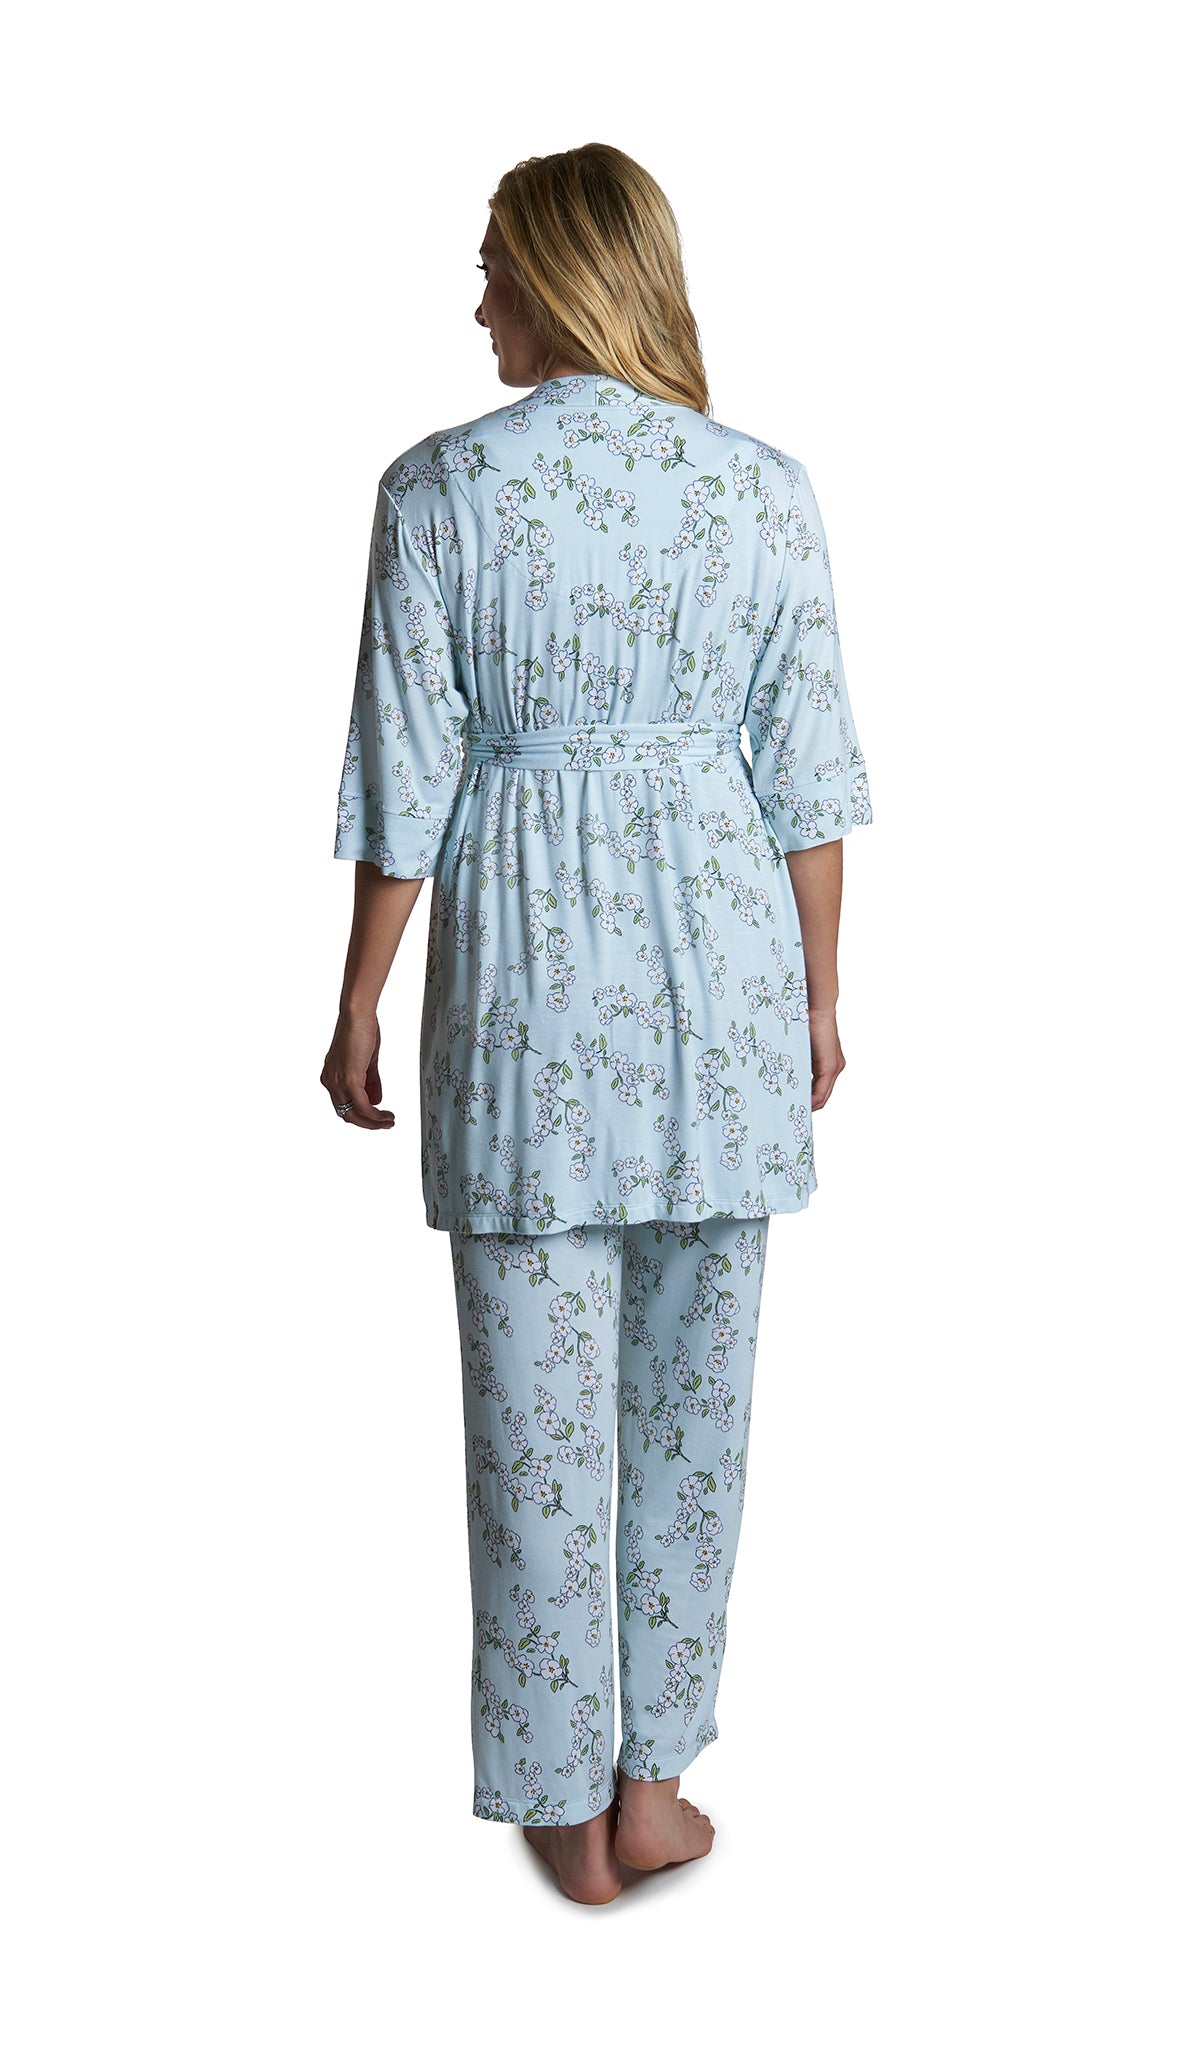 Baby's Breath Analise 5-Piece Set, back shot of woman wearing robe and pant.